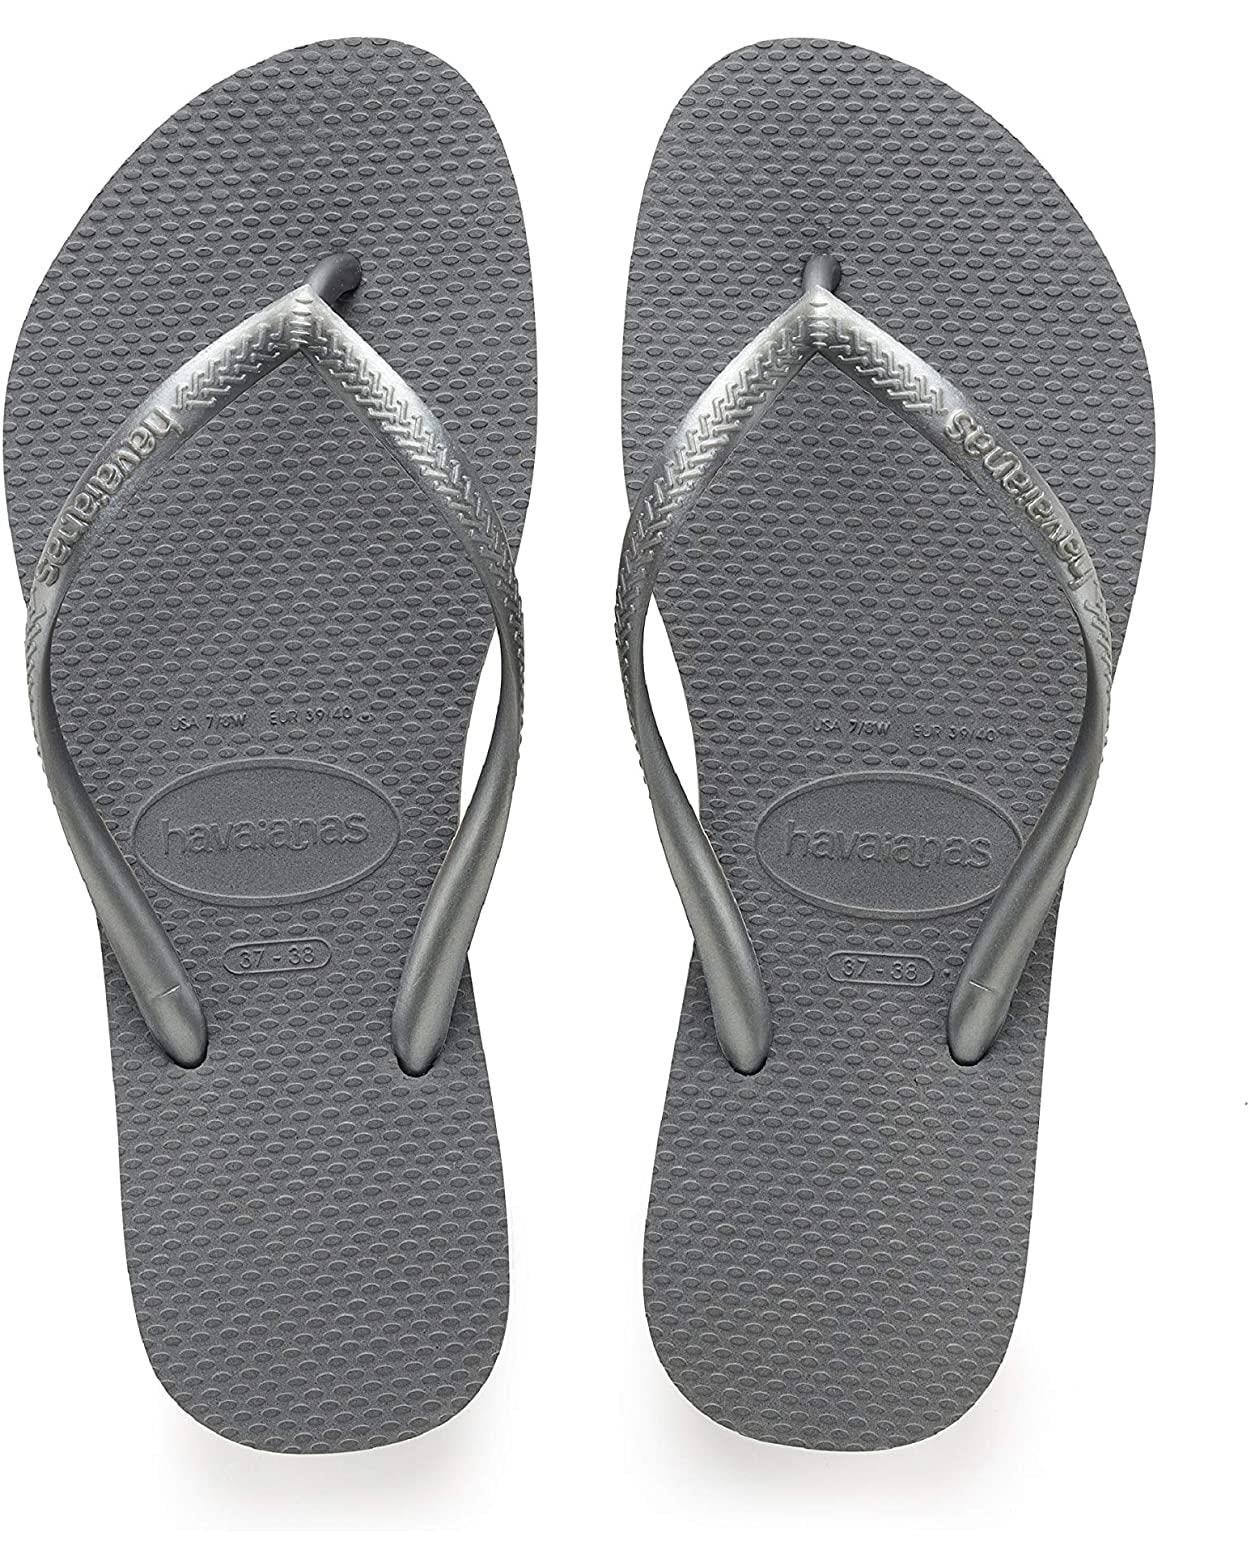 gold and white havaianas